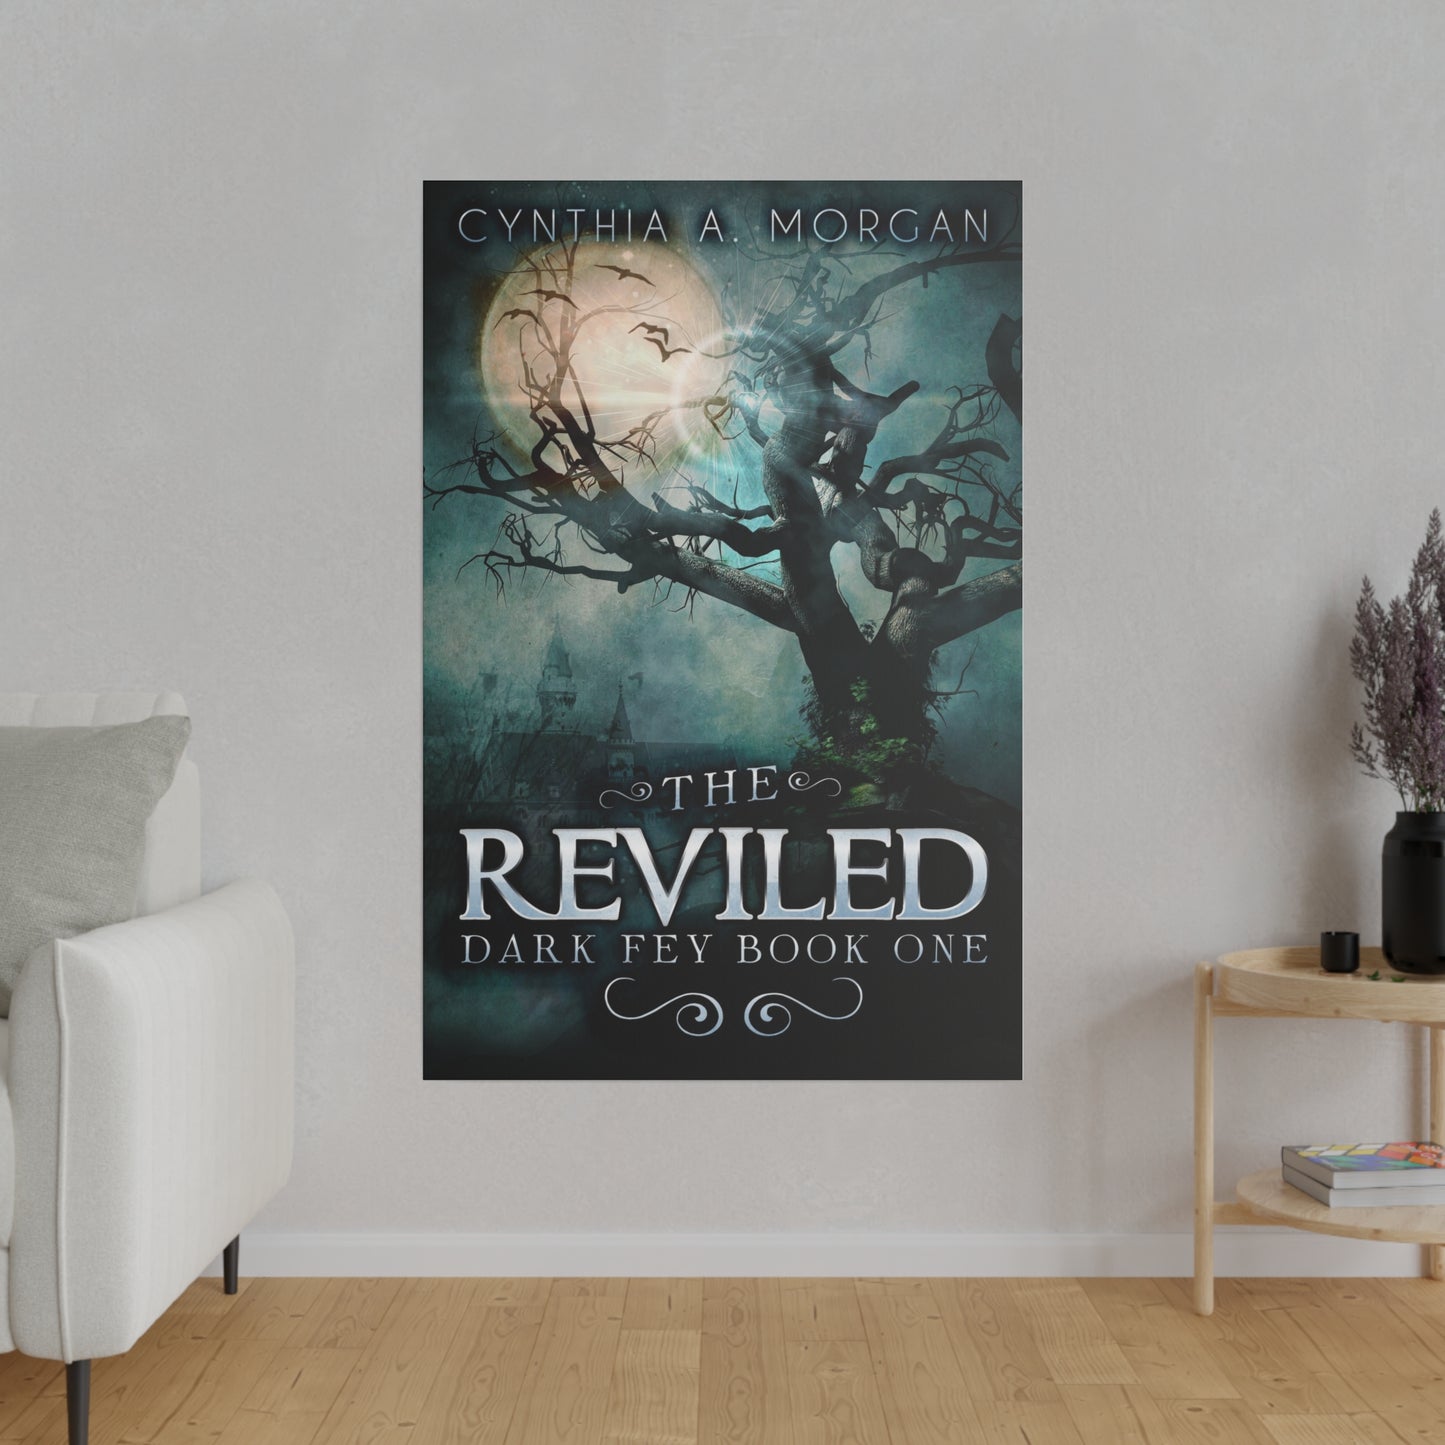 The Reviled - Canvas